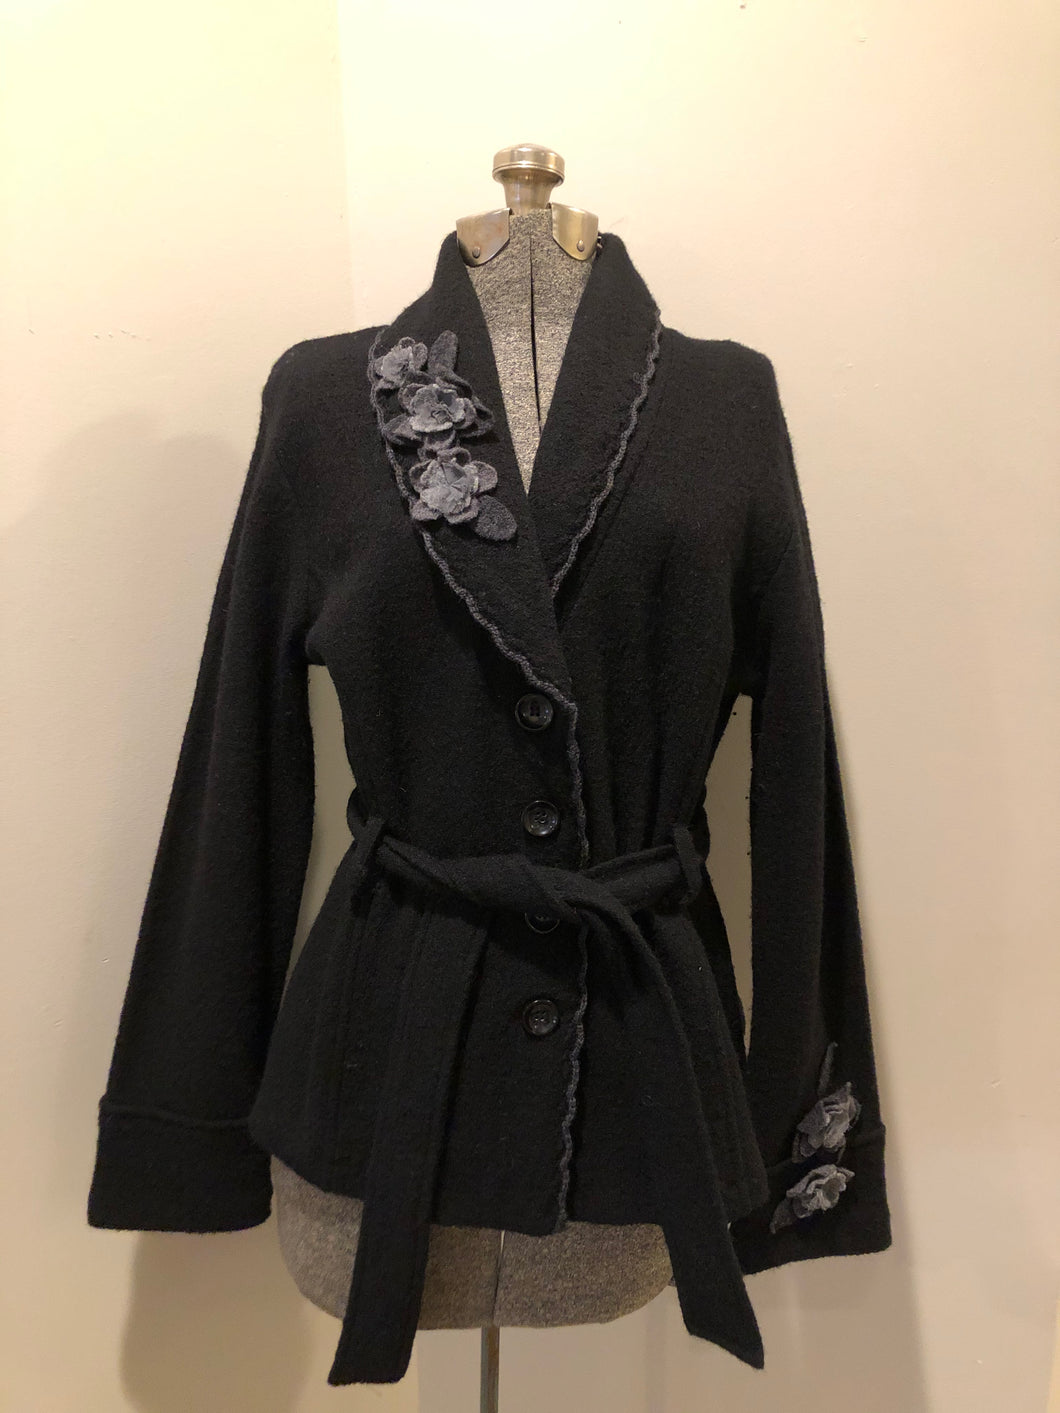 Kingspier Vintage - Cynthia Rowley black belted wool cardigan with buttons and grey wool flower details. Size medium.
